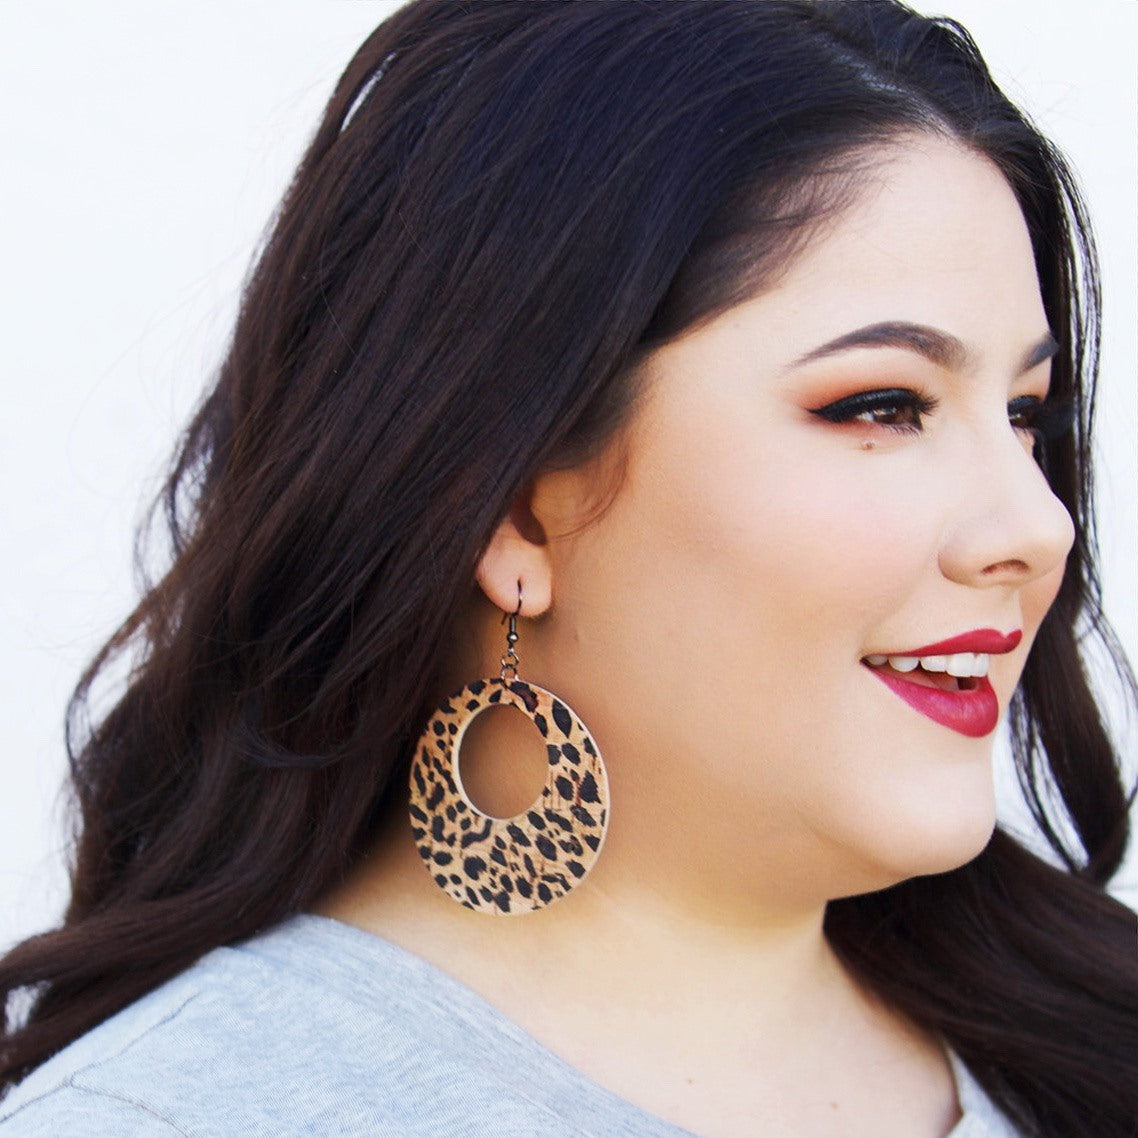 Dixie Bliss Earrings: Catalina in Wild & Free